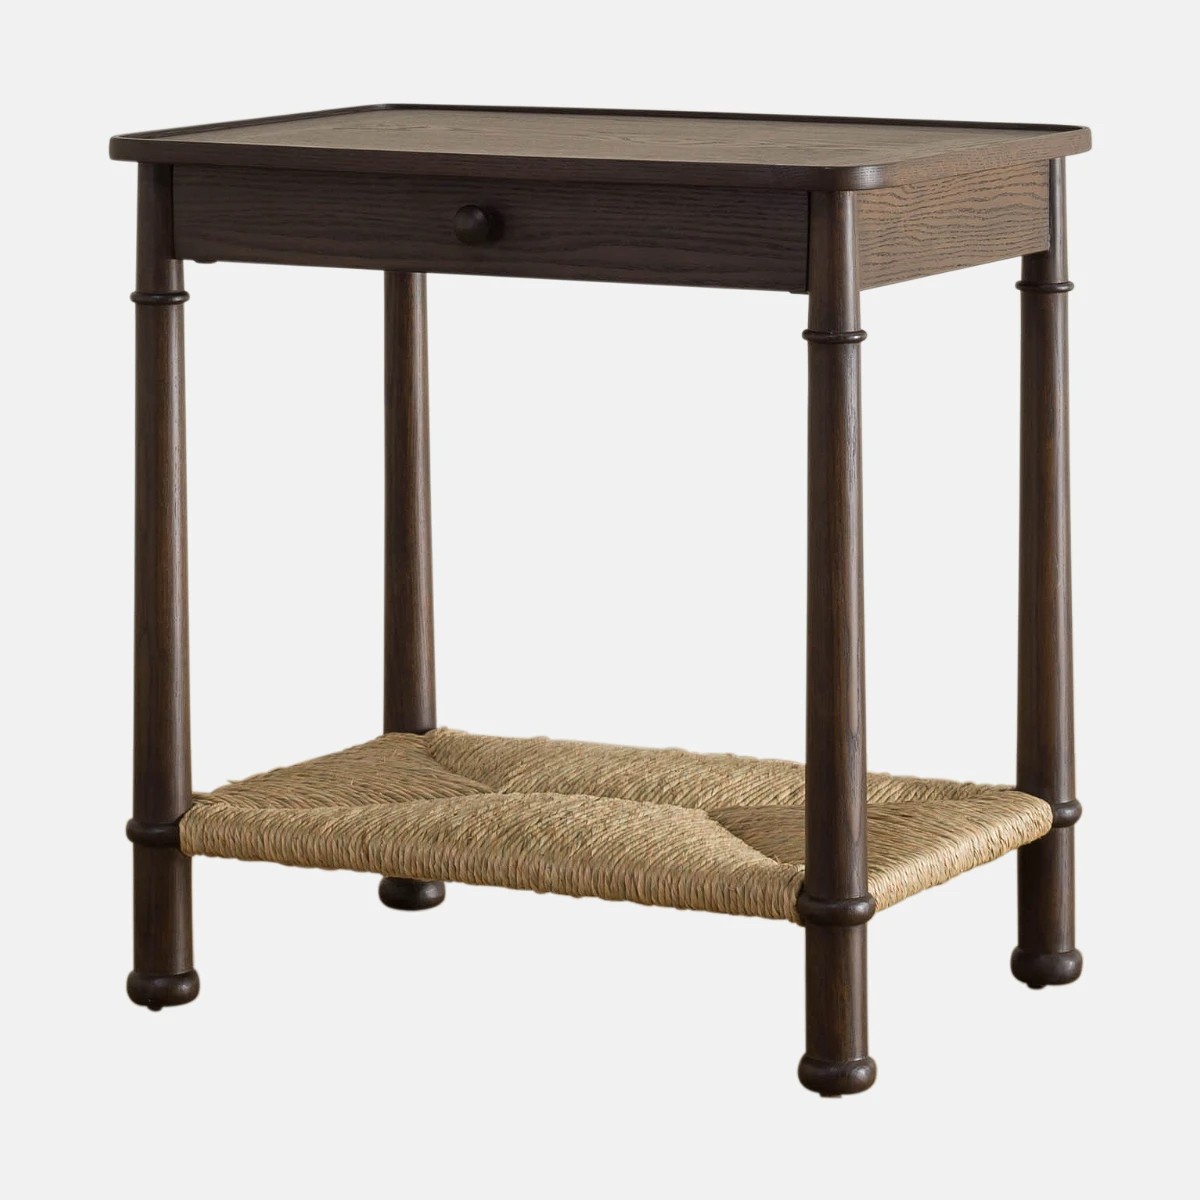 The image of an Austin Side Table product